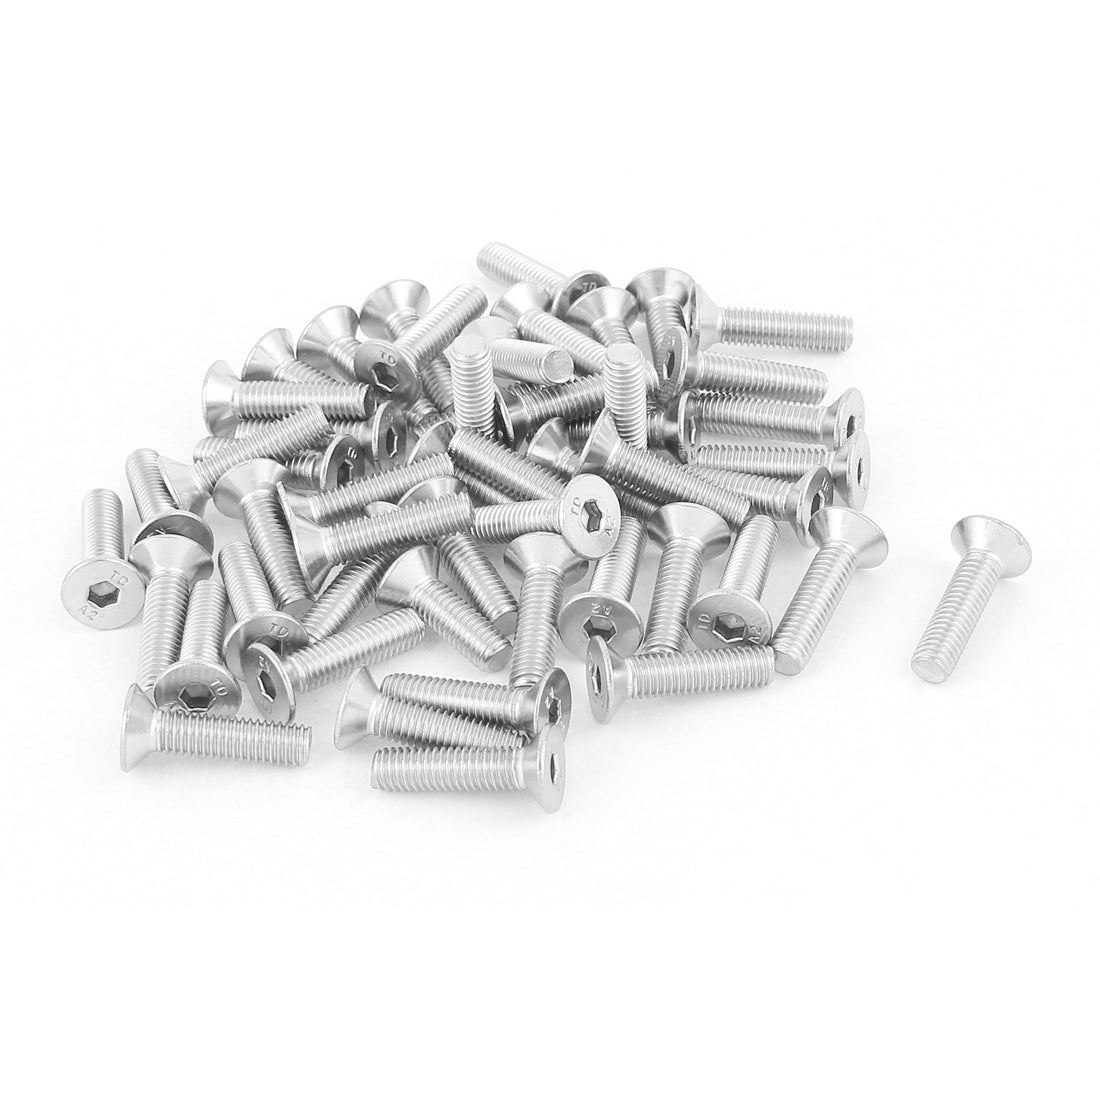 uxcell Uxcell M5x20mm Stainless Steel Hex Socket Flat Head Countersunk Bolts Screw 50Pcs